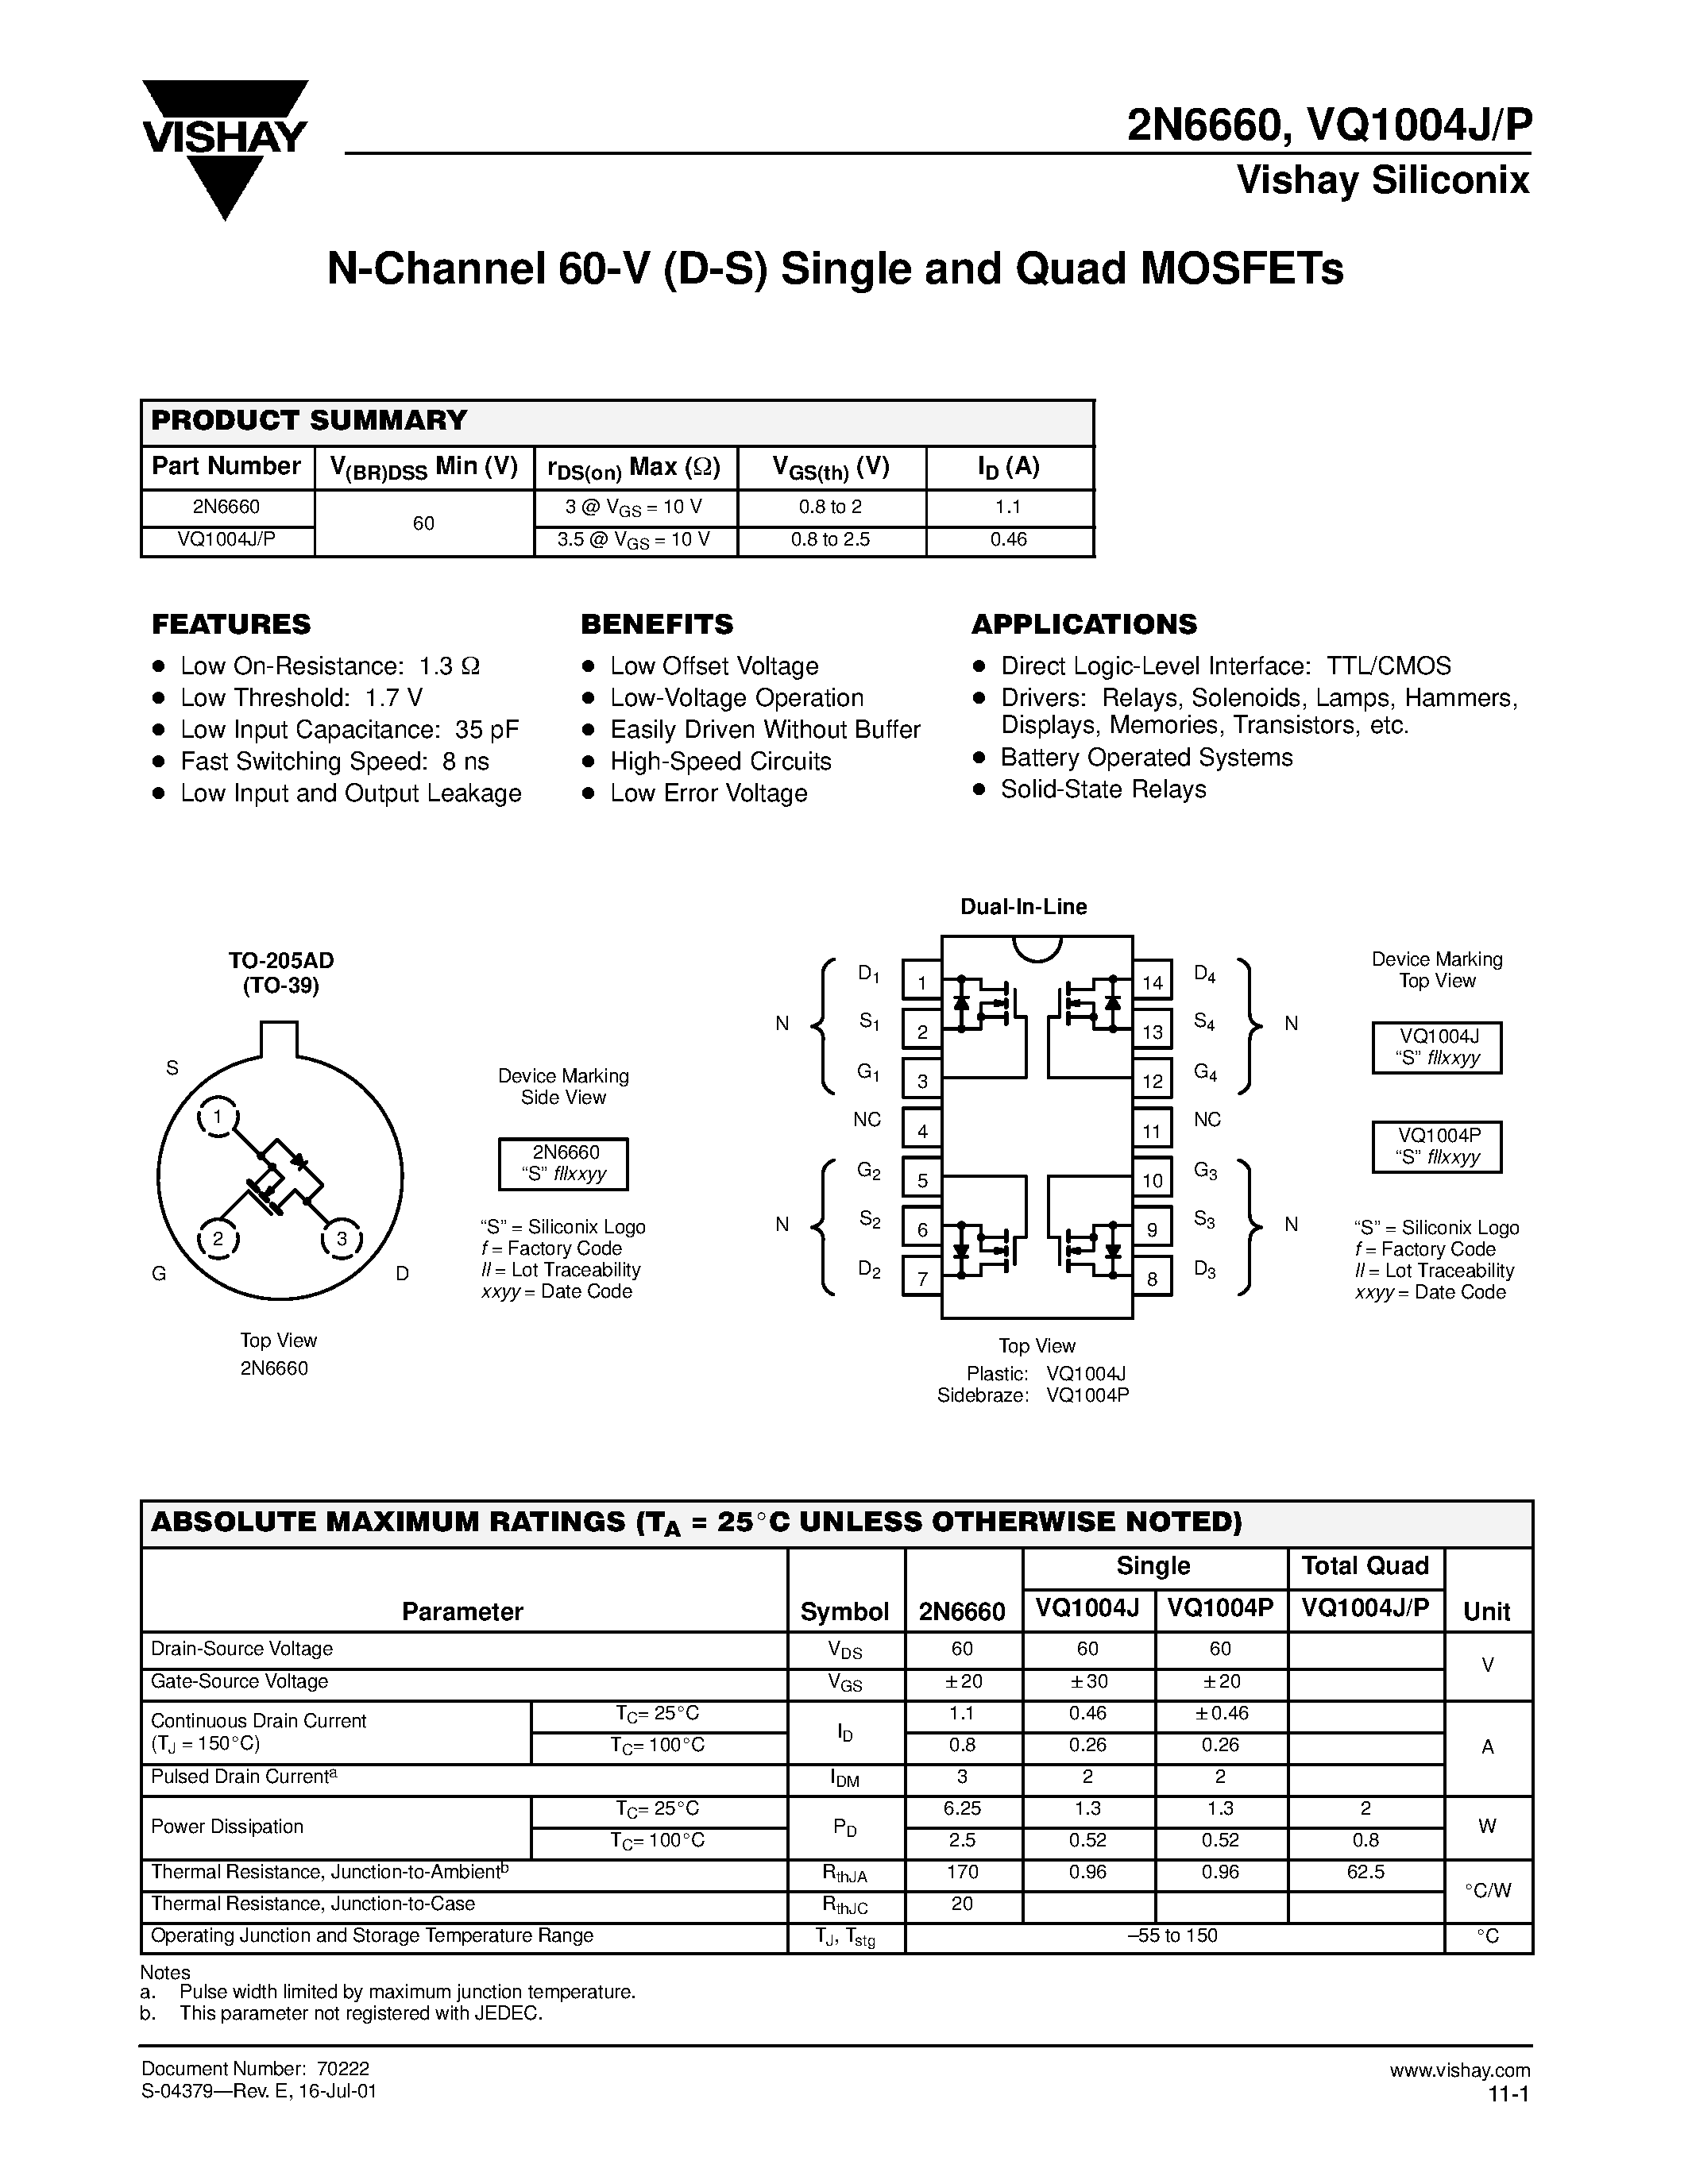 Datasheet VQ1004J - N-Channel 60-V (D-S) Single and Quad MOSFETs page 1